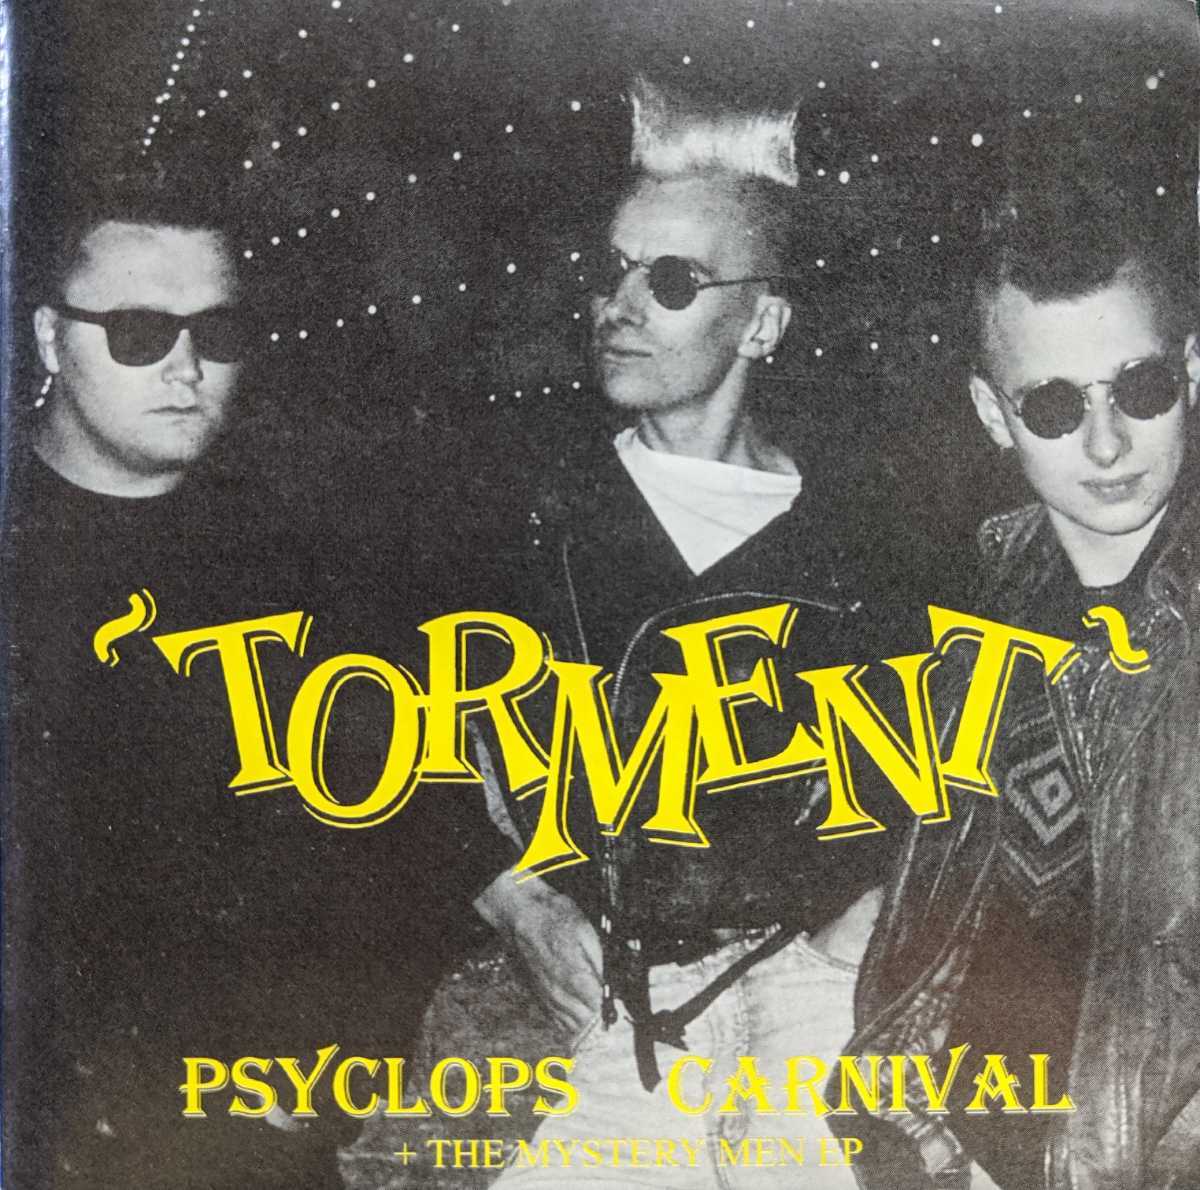 Y2-9【2in1CD】Torment / Psyclops Carnival / The Mystery Men EP / CLCD6485 / 4024572115234 / トーメント / サイコビリー